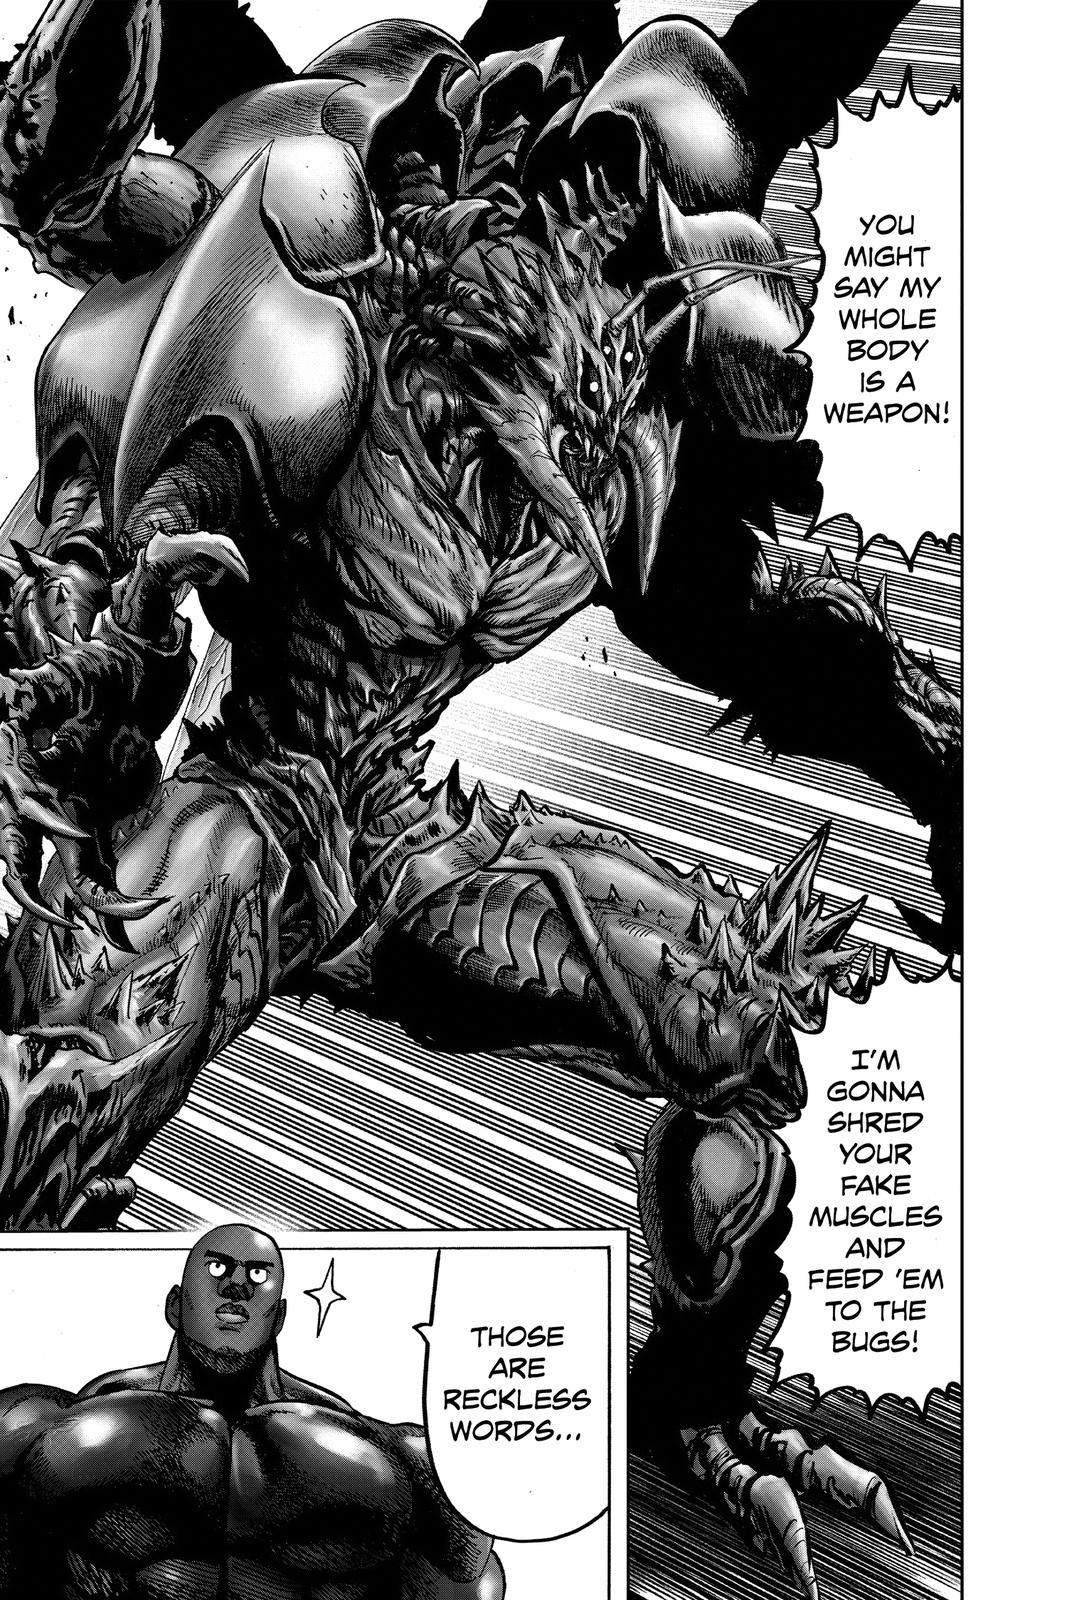 One-Punch Man, Punch 112 image 11